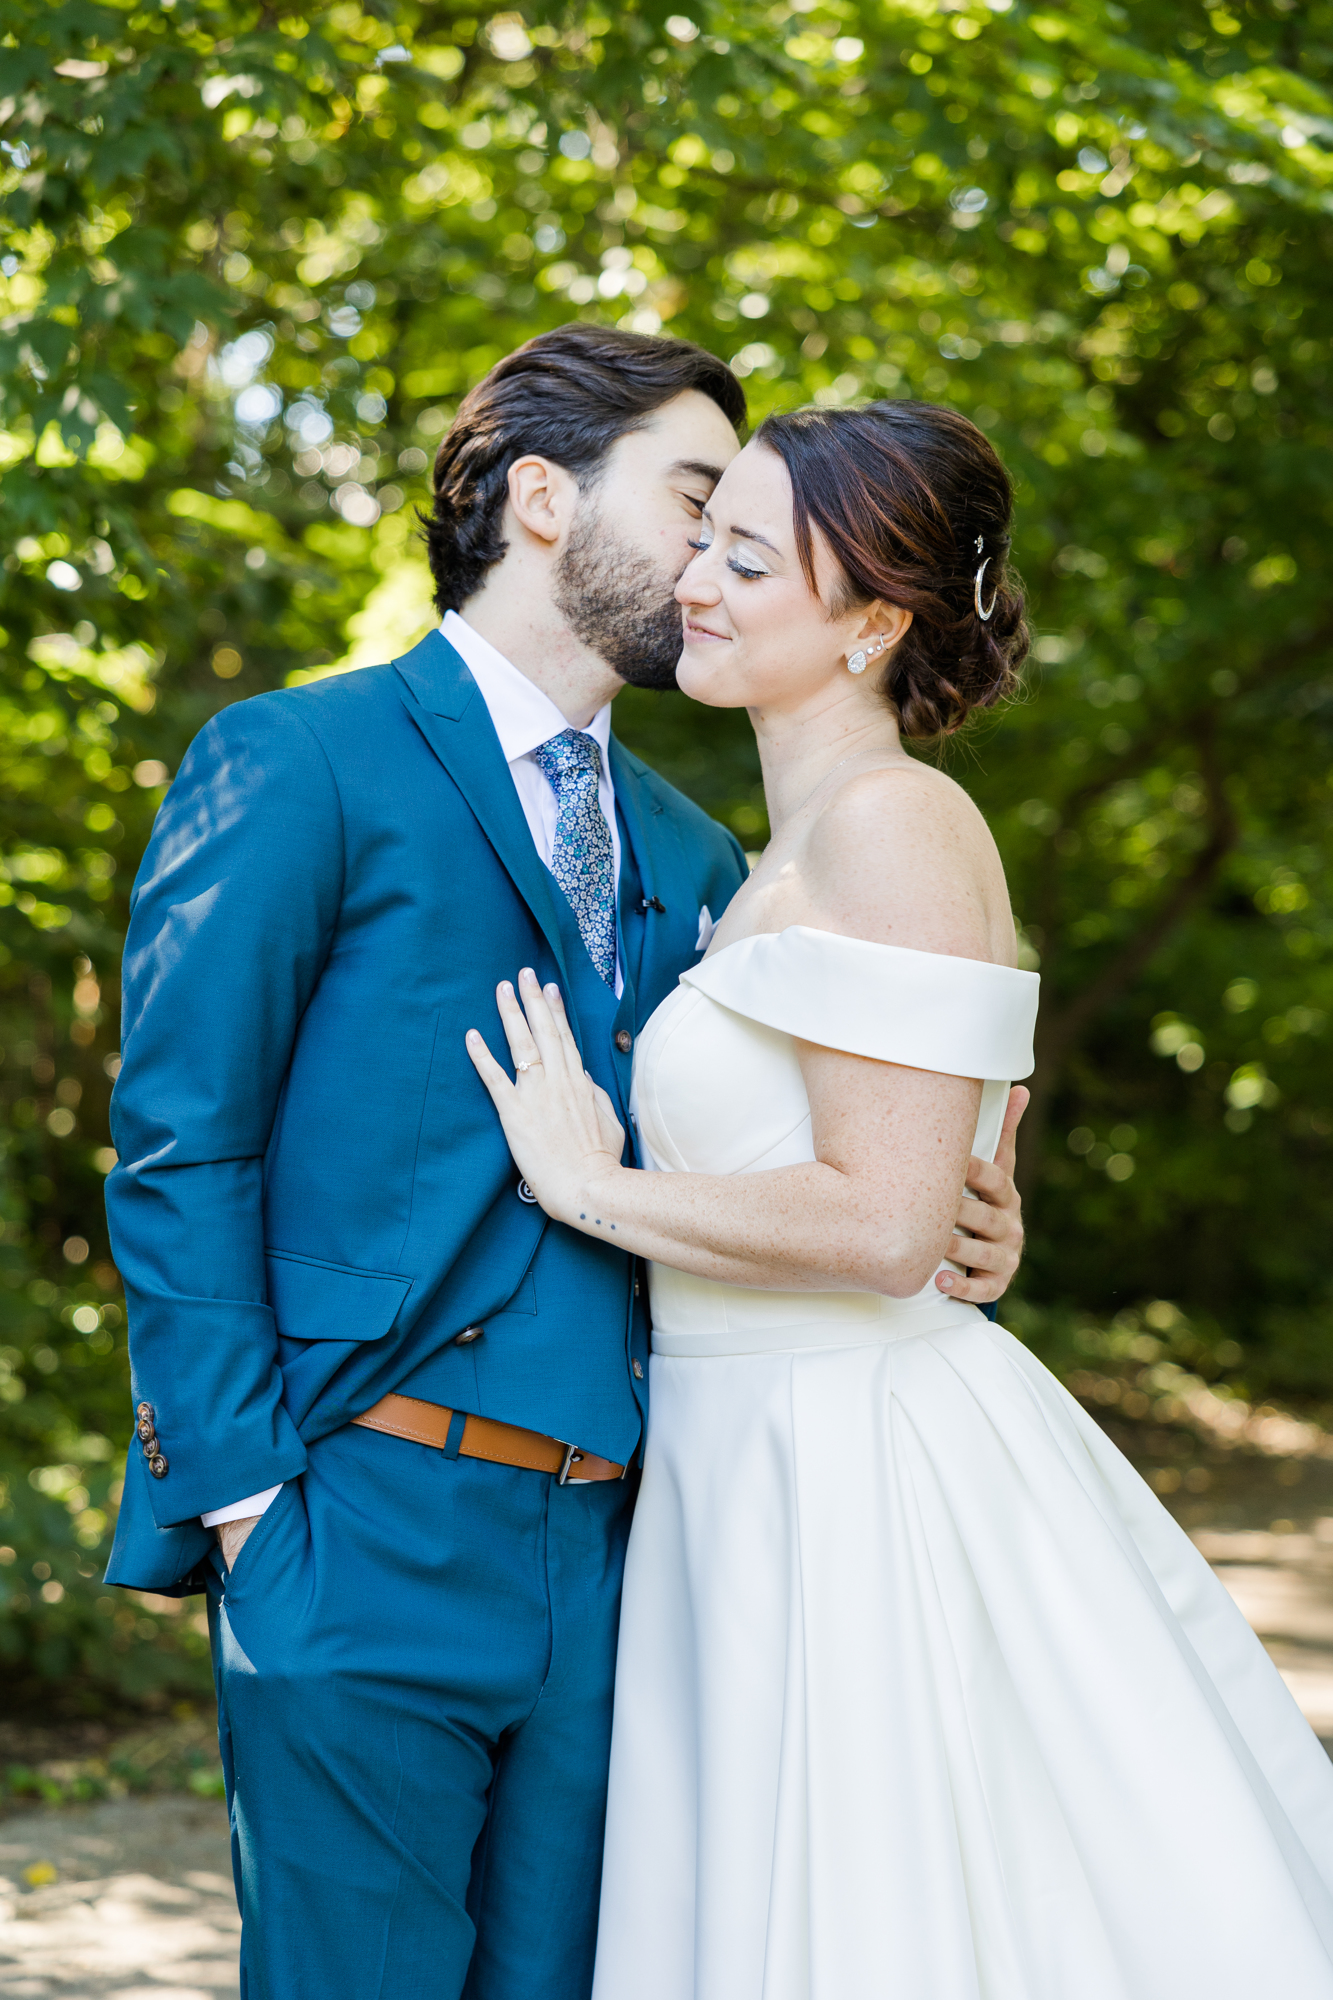 Intimate Autumn Wedding Photos at the Prospect Park Boathouse in Brooklyn